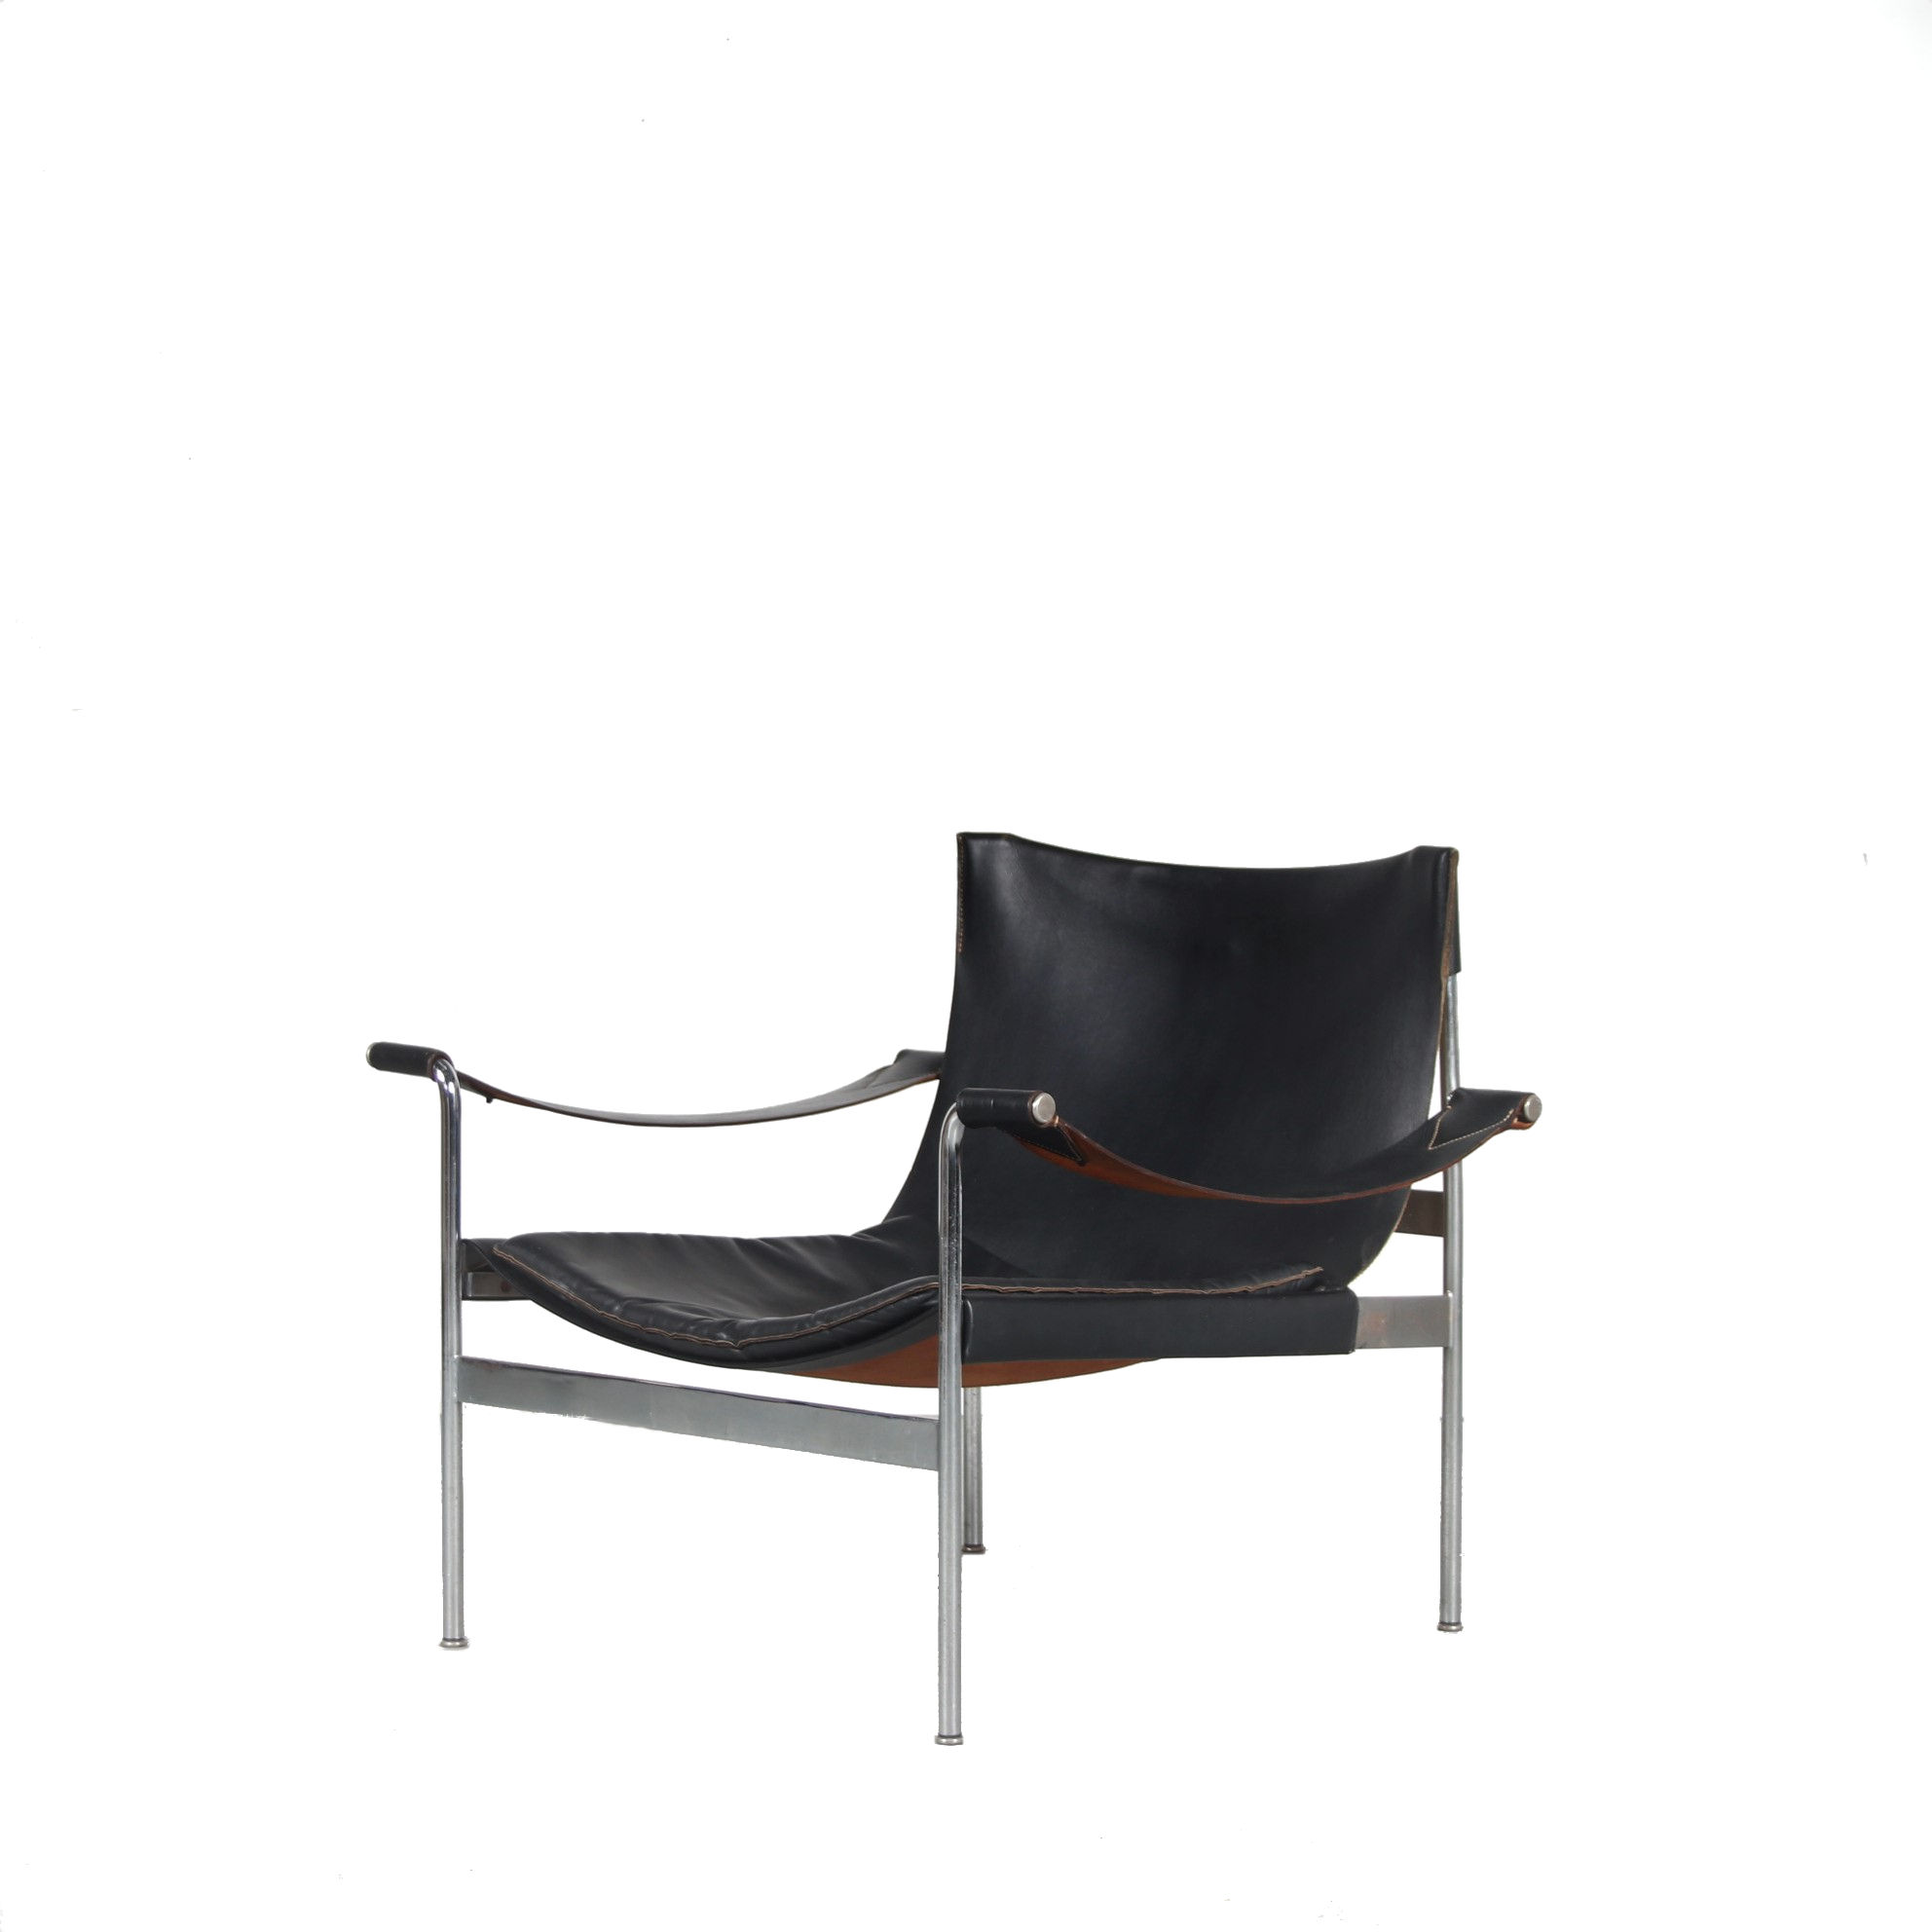 2201 2 (157) m25777 1960s Easy chair on chrome metal base with black neck leather upholstery Hans Könecke Tecta, Germany